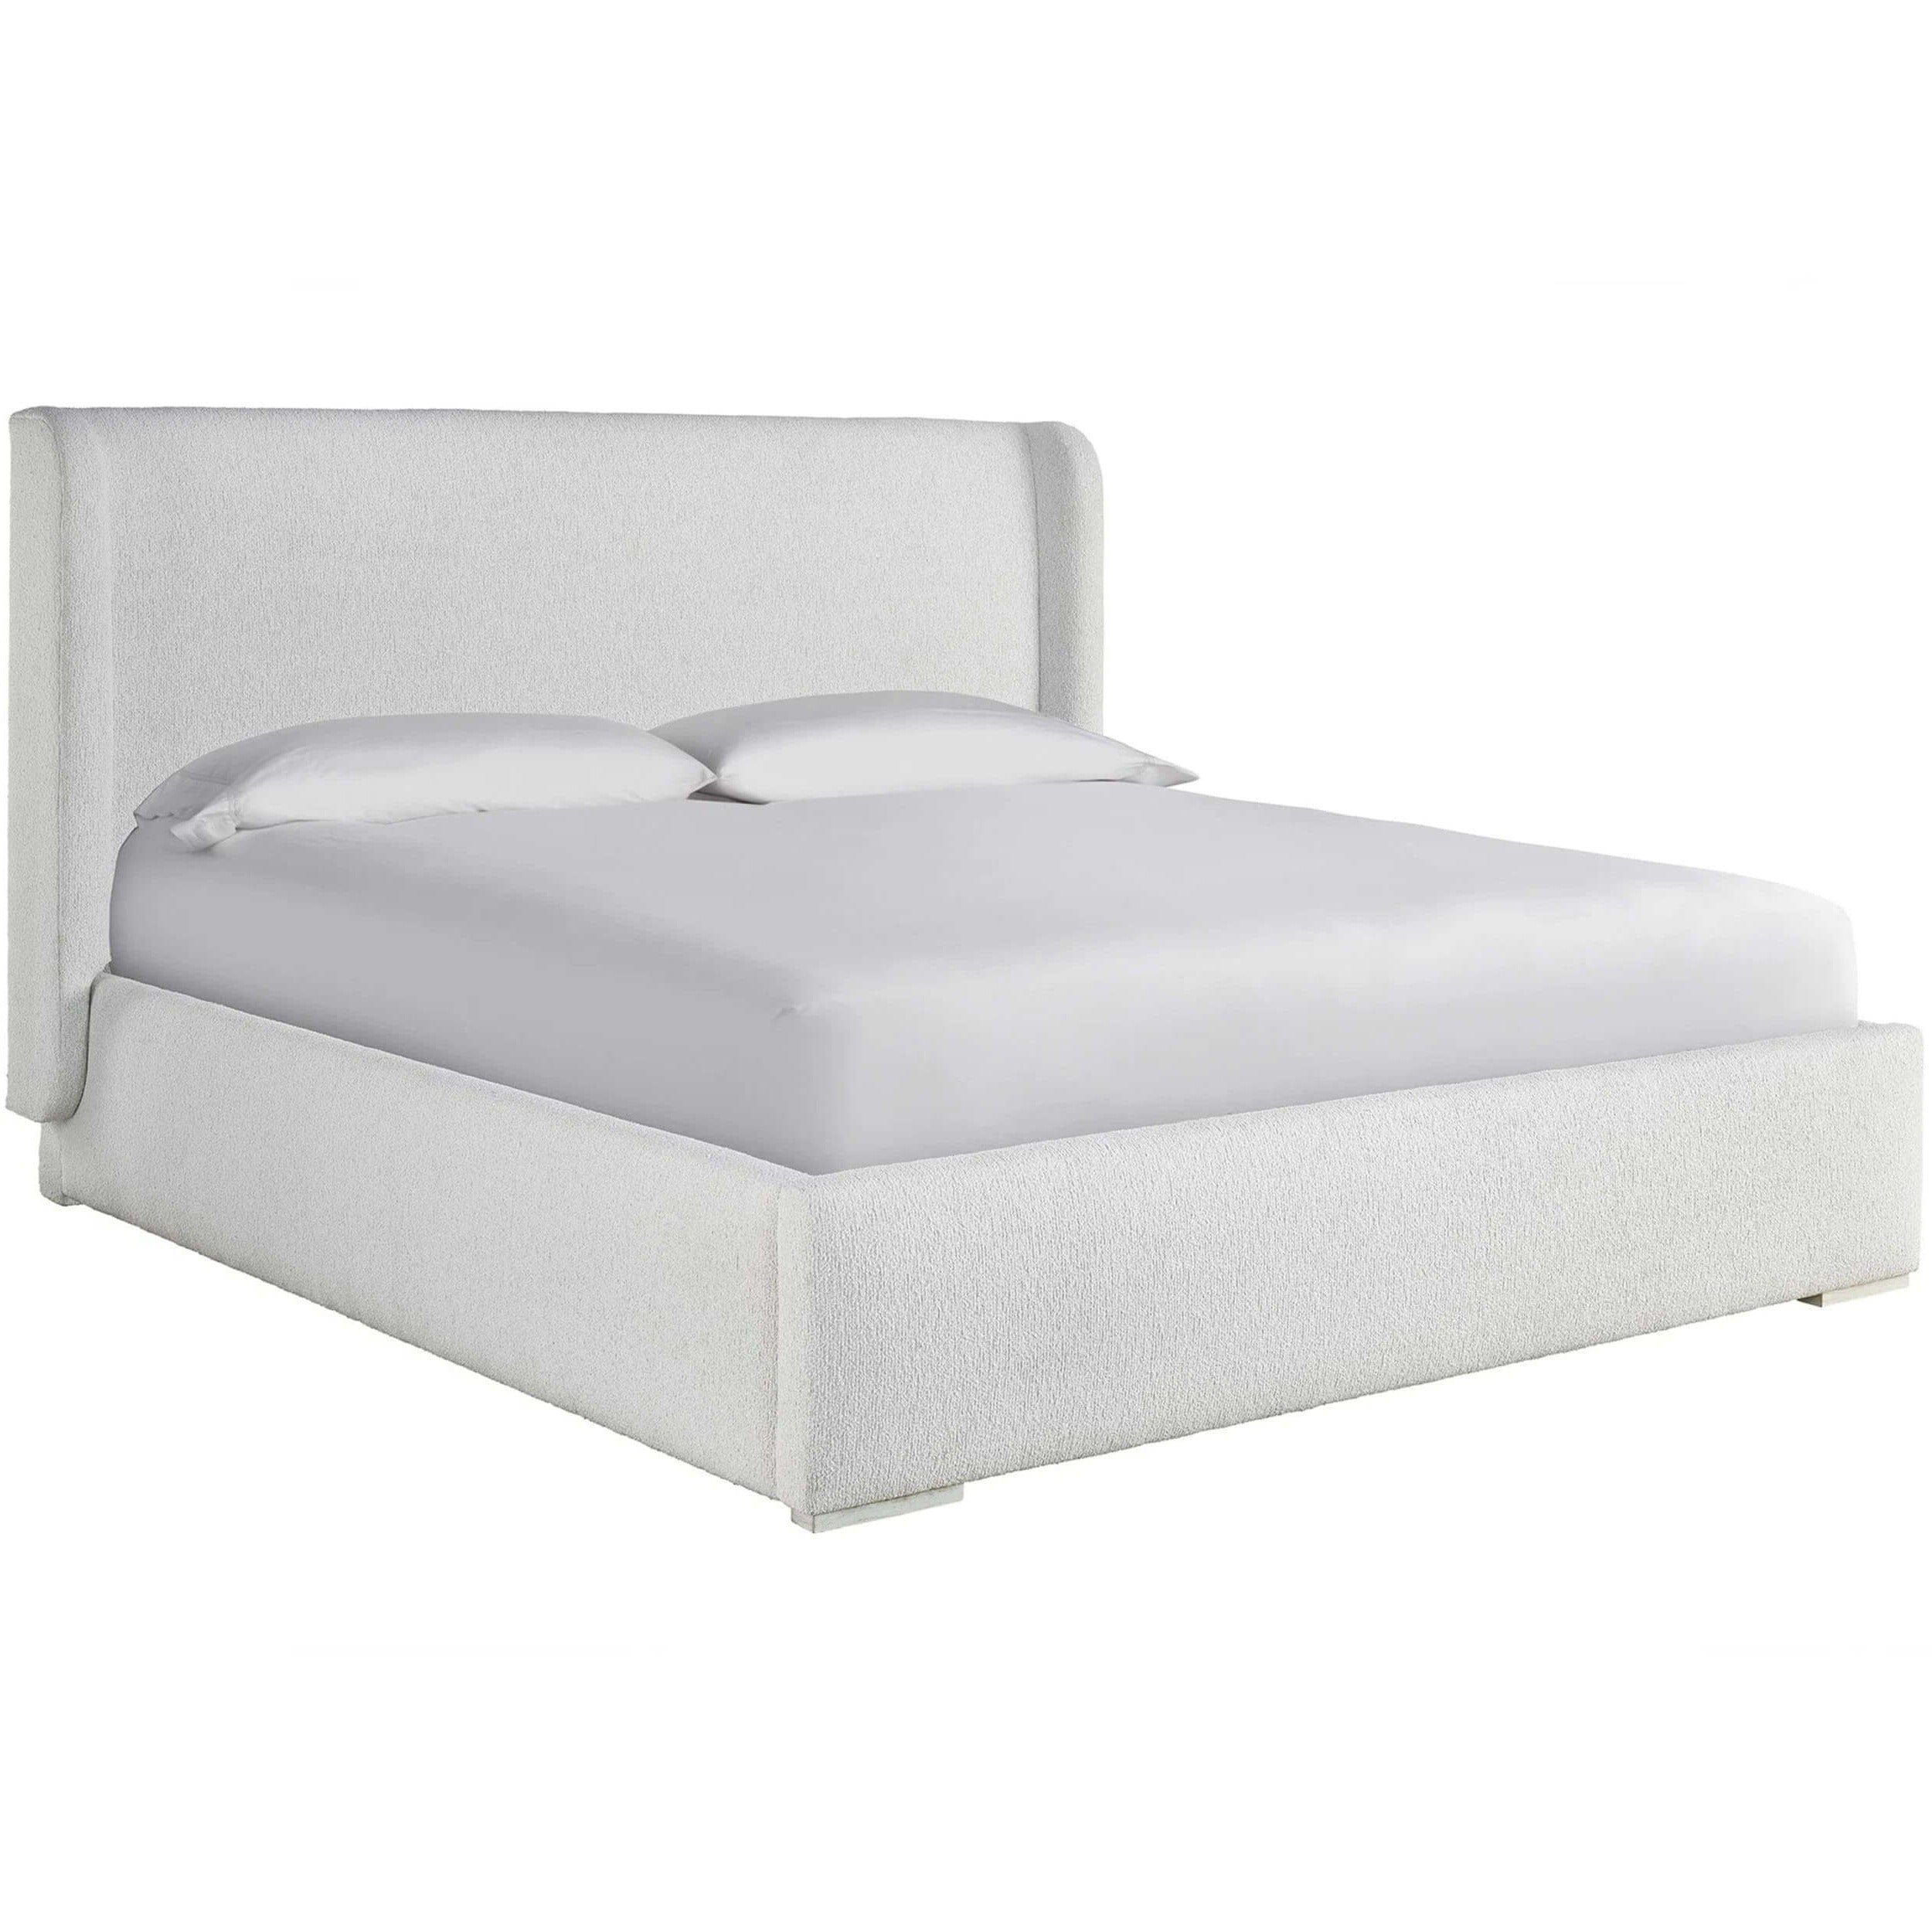 Image of Restore Bed, Cottony Ivory